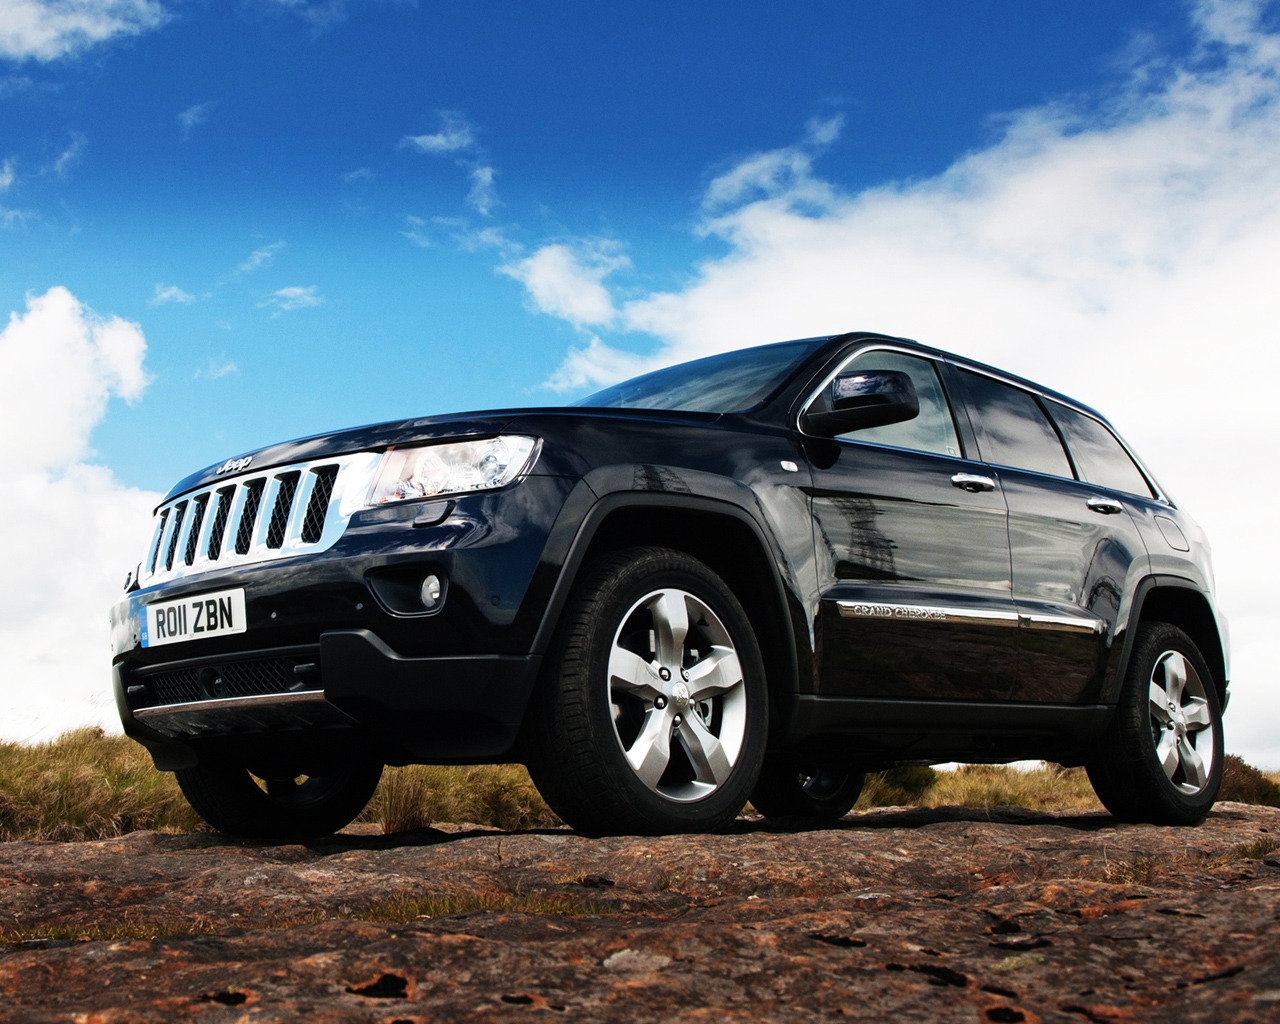 2011 Jeep Grand Cherokee for 1280 x 1024 resolution